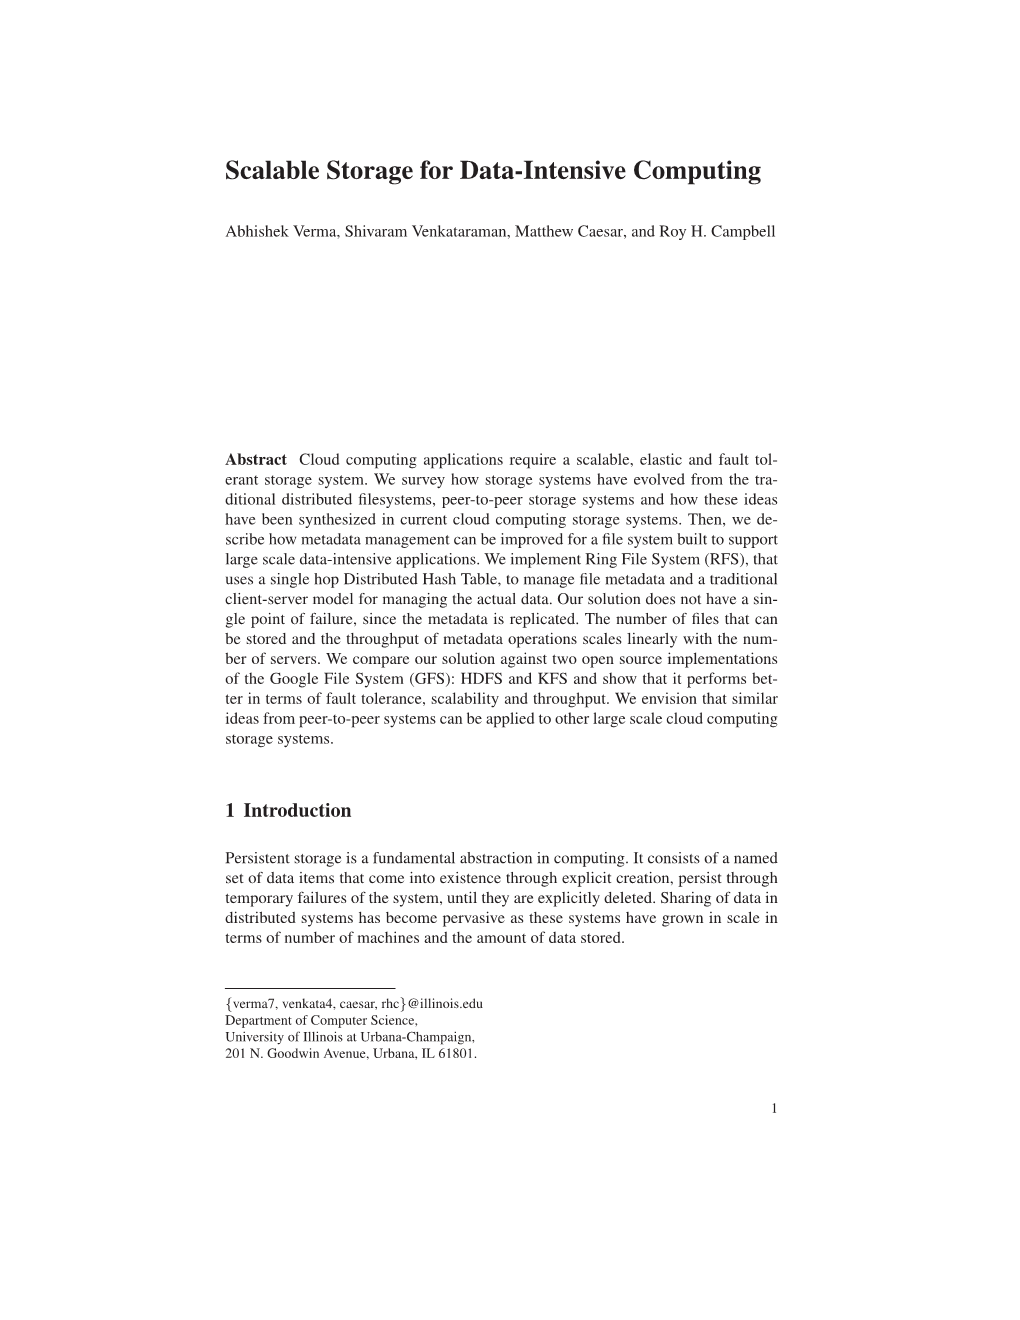 Scalable Storage for Data-Intensive Computing